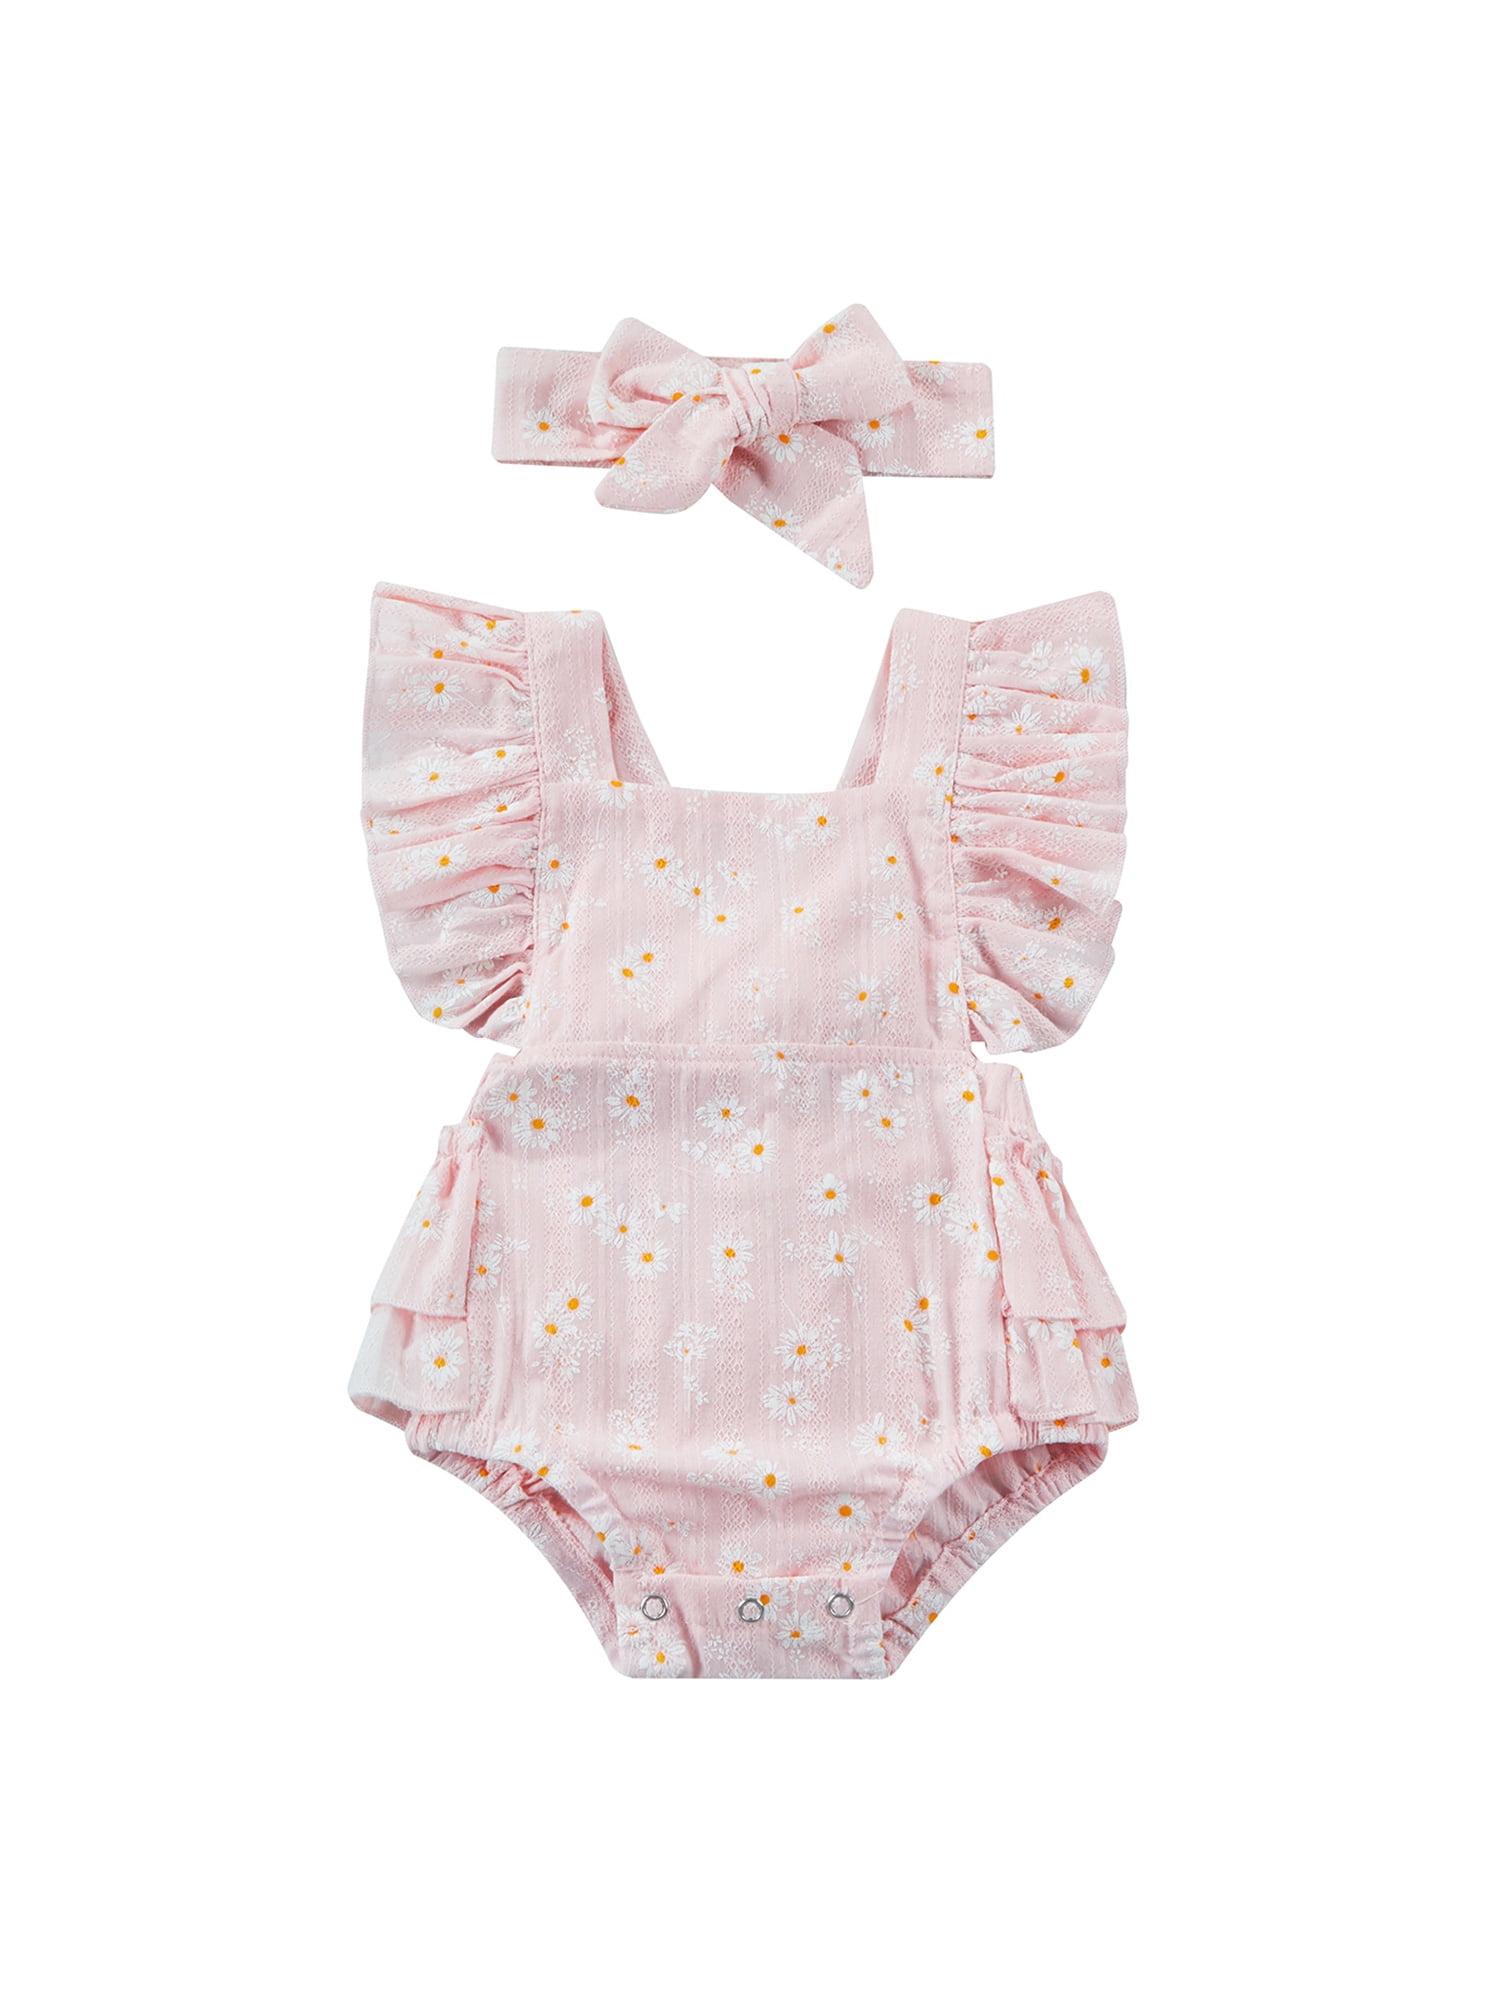 Spanish Style baby Girl KNITTED BOW Romper All in one Pink/White 0-3 3-6 6-9 m